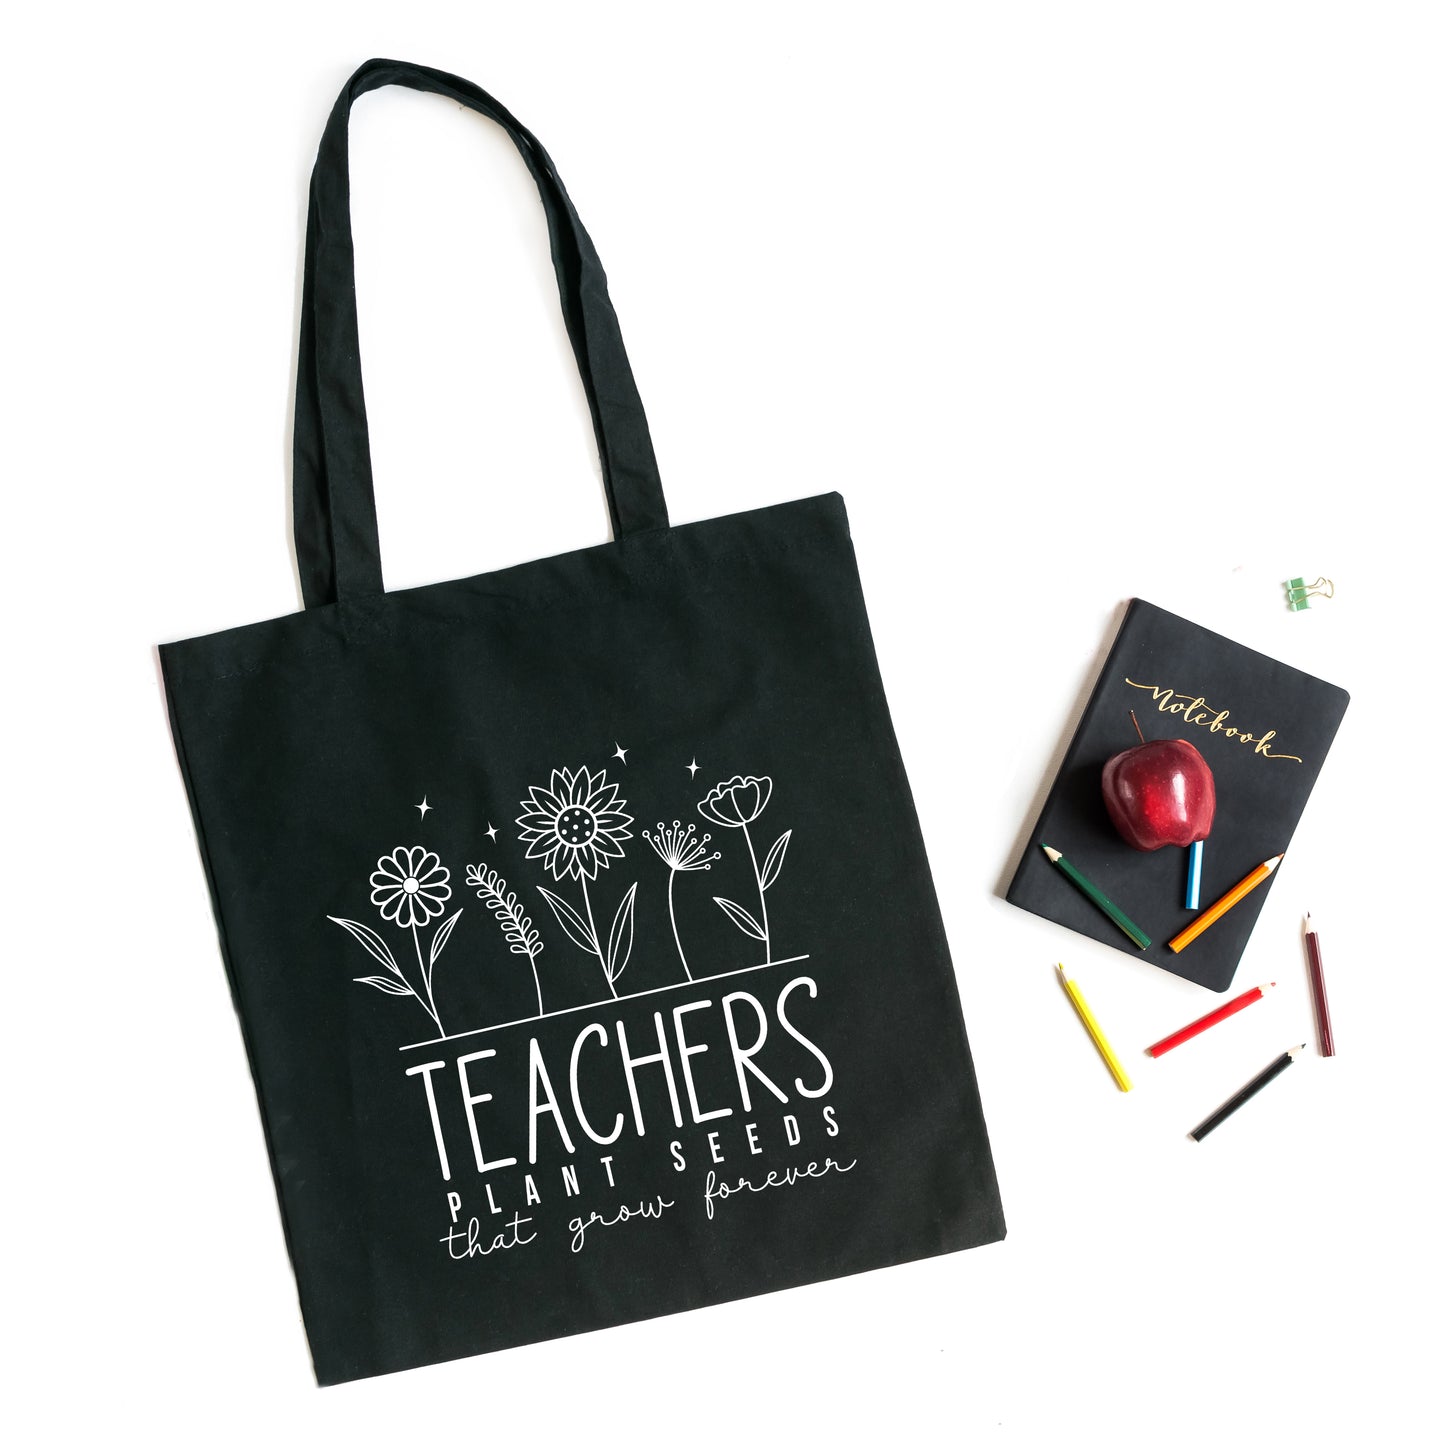 Teachers Plant Seeds That Grow Forever | Tote Bag